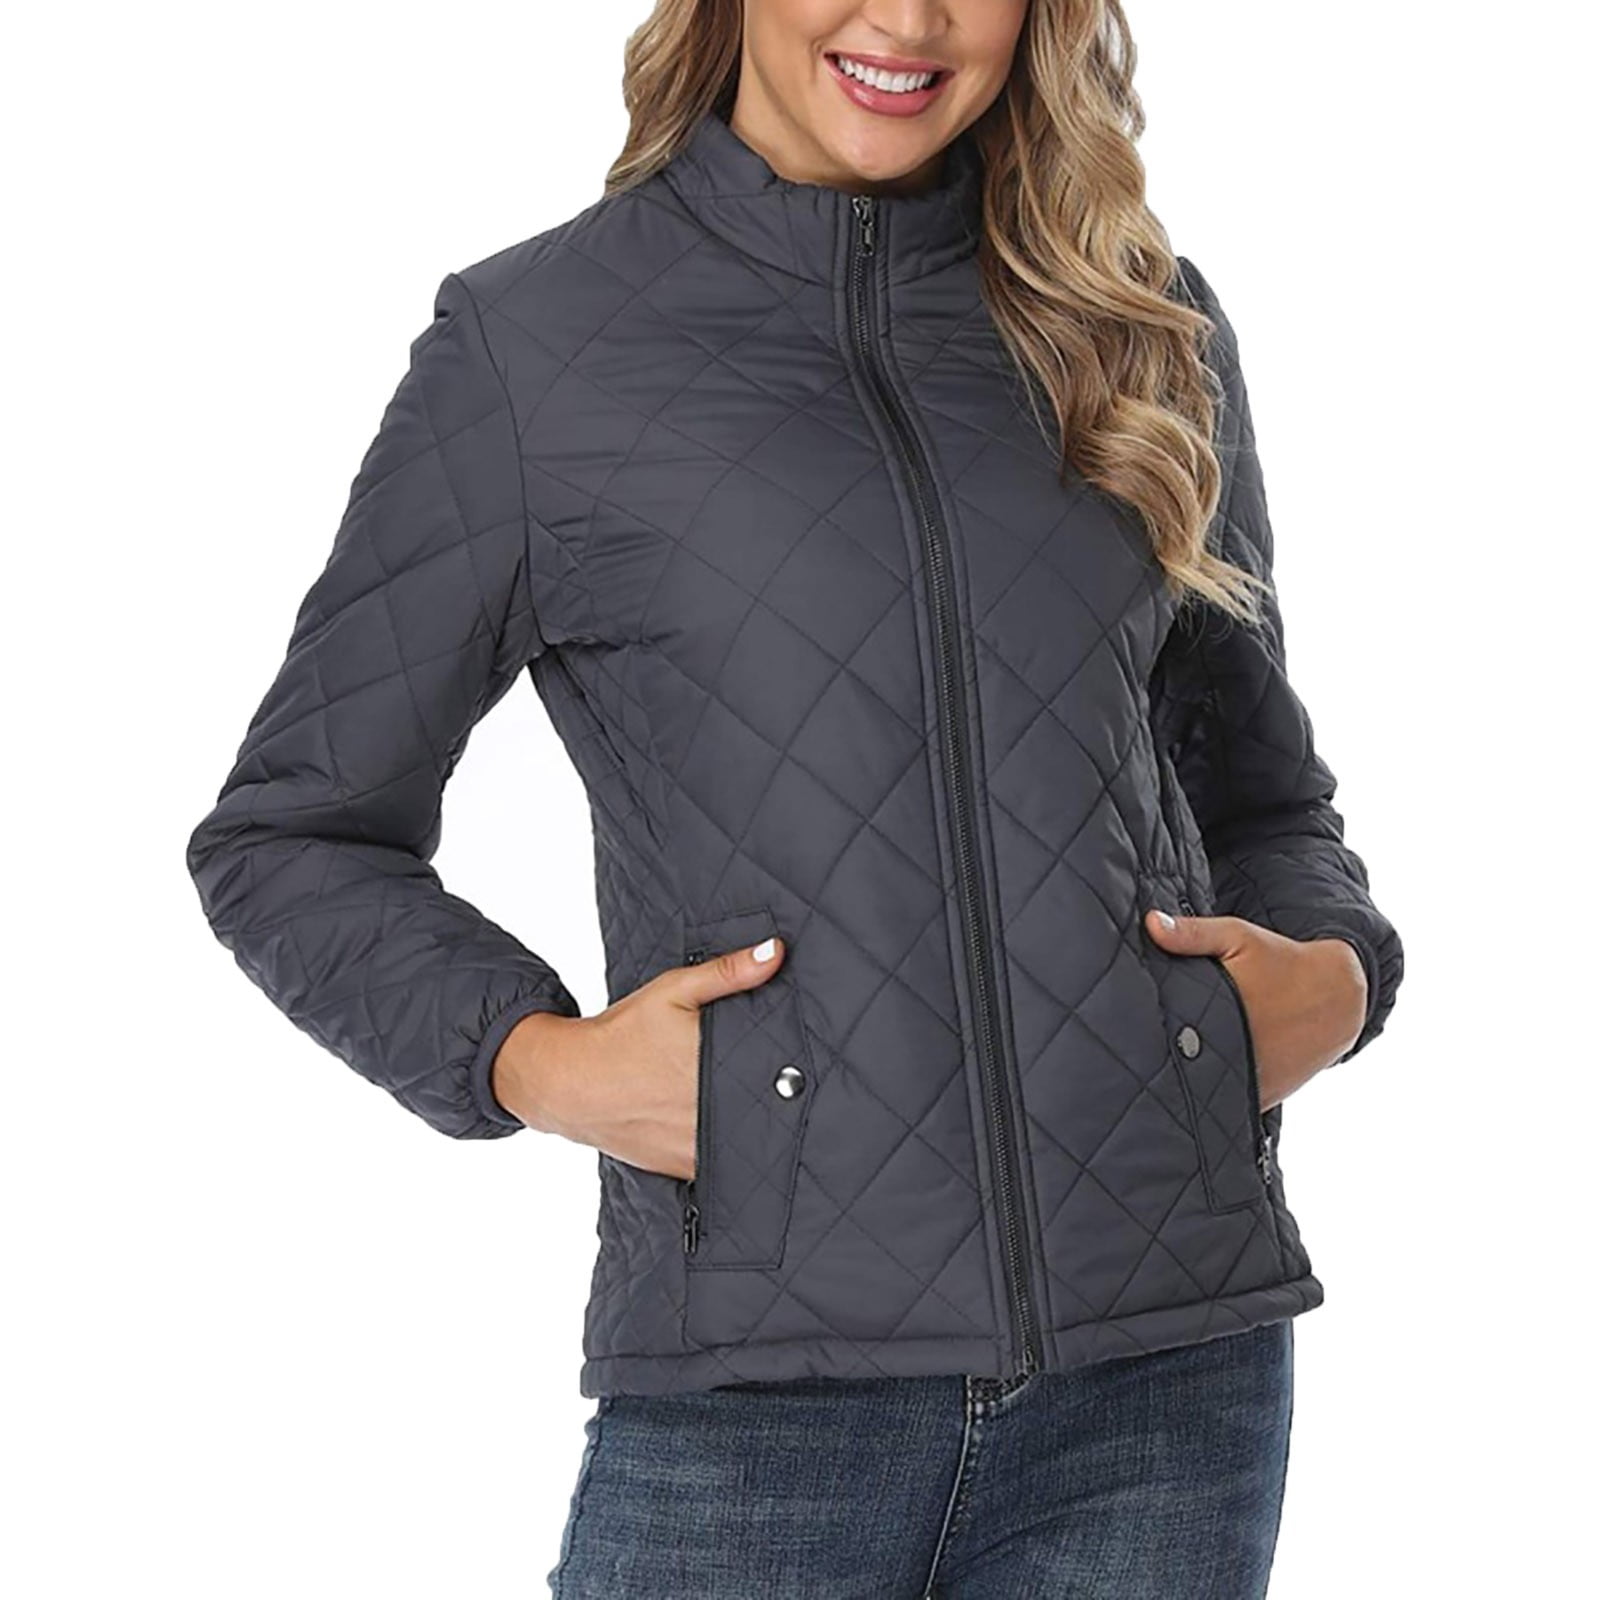 XIUH Women's Quilted Barn Jacket Plus Size Warm Autumn And Winter ...